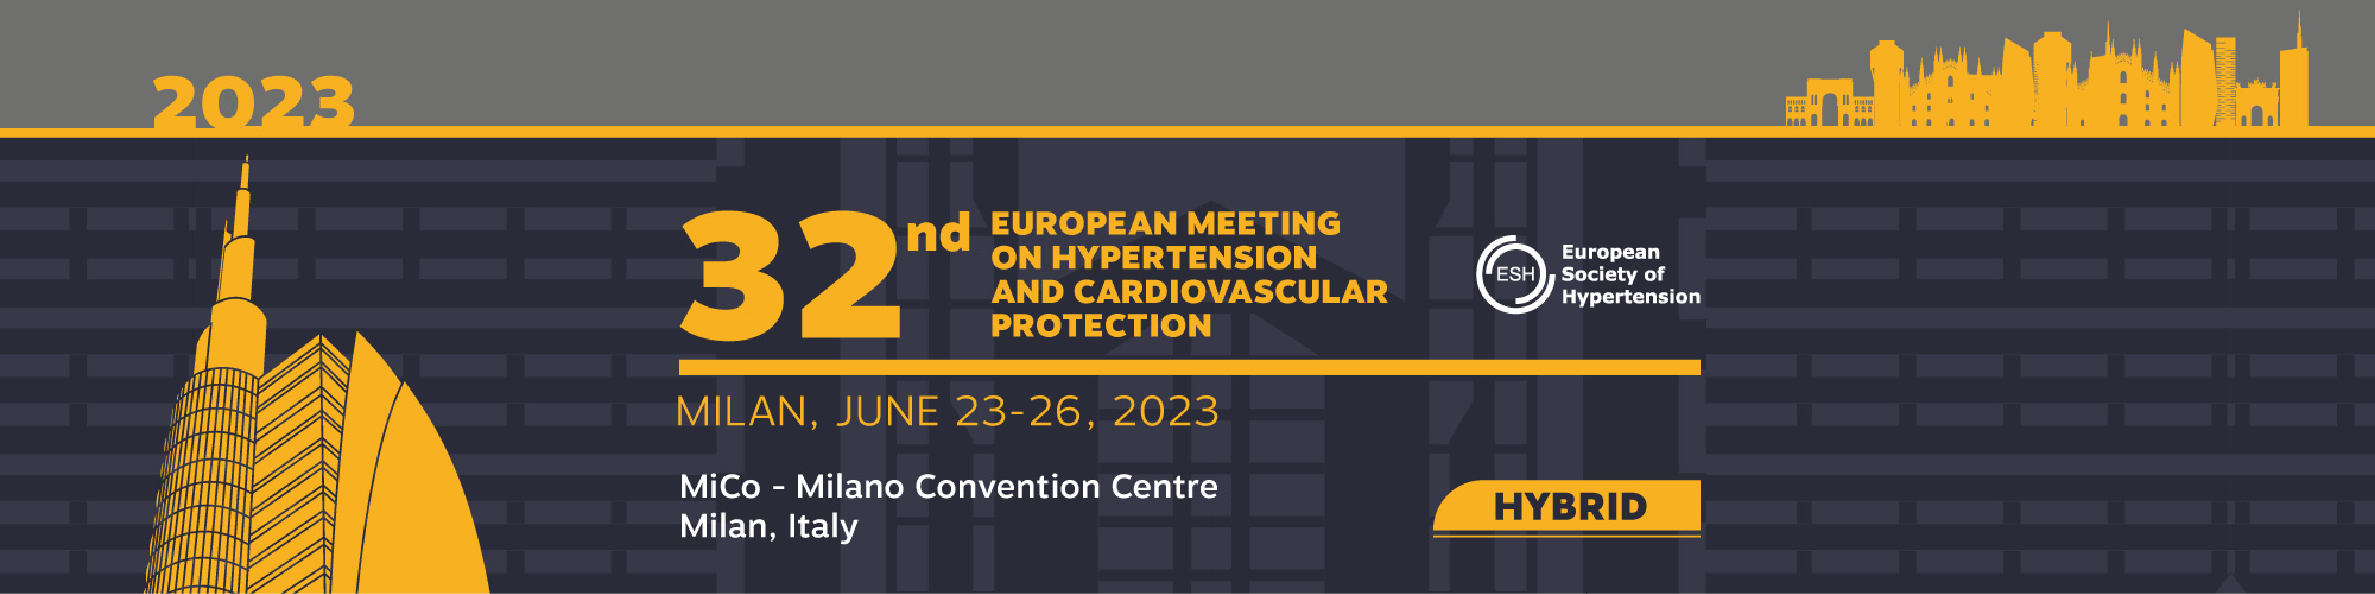 32nd Scientific Meeting of the European Society of Hypertension - ESH 2022